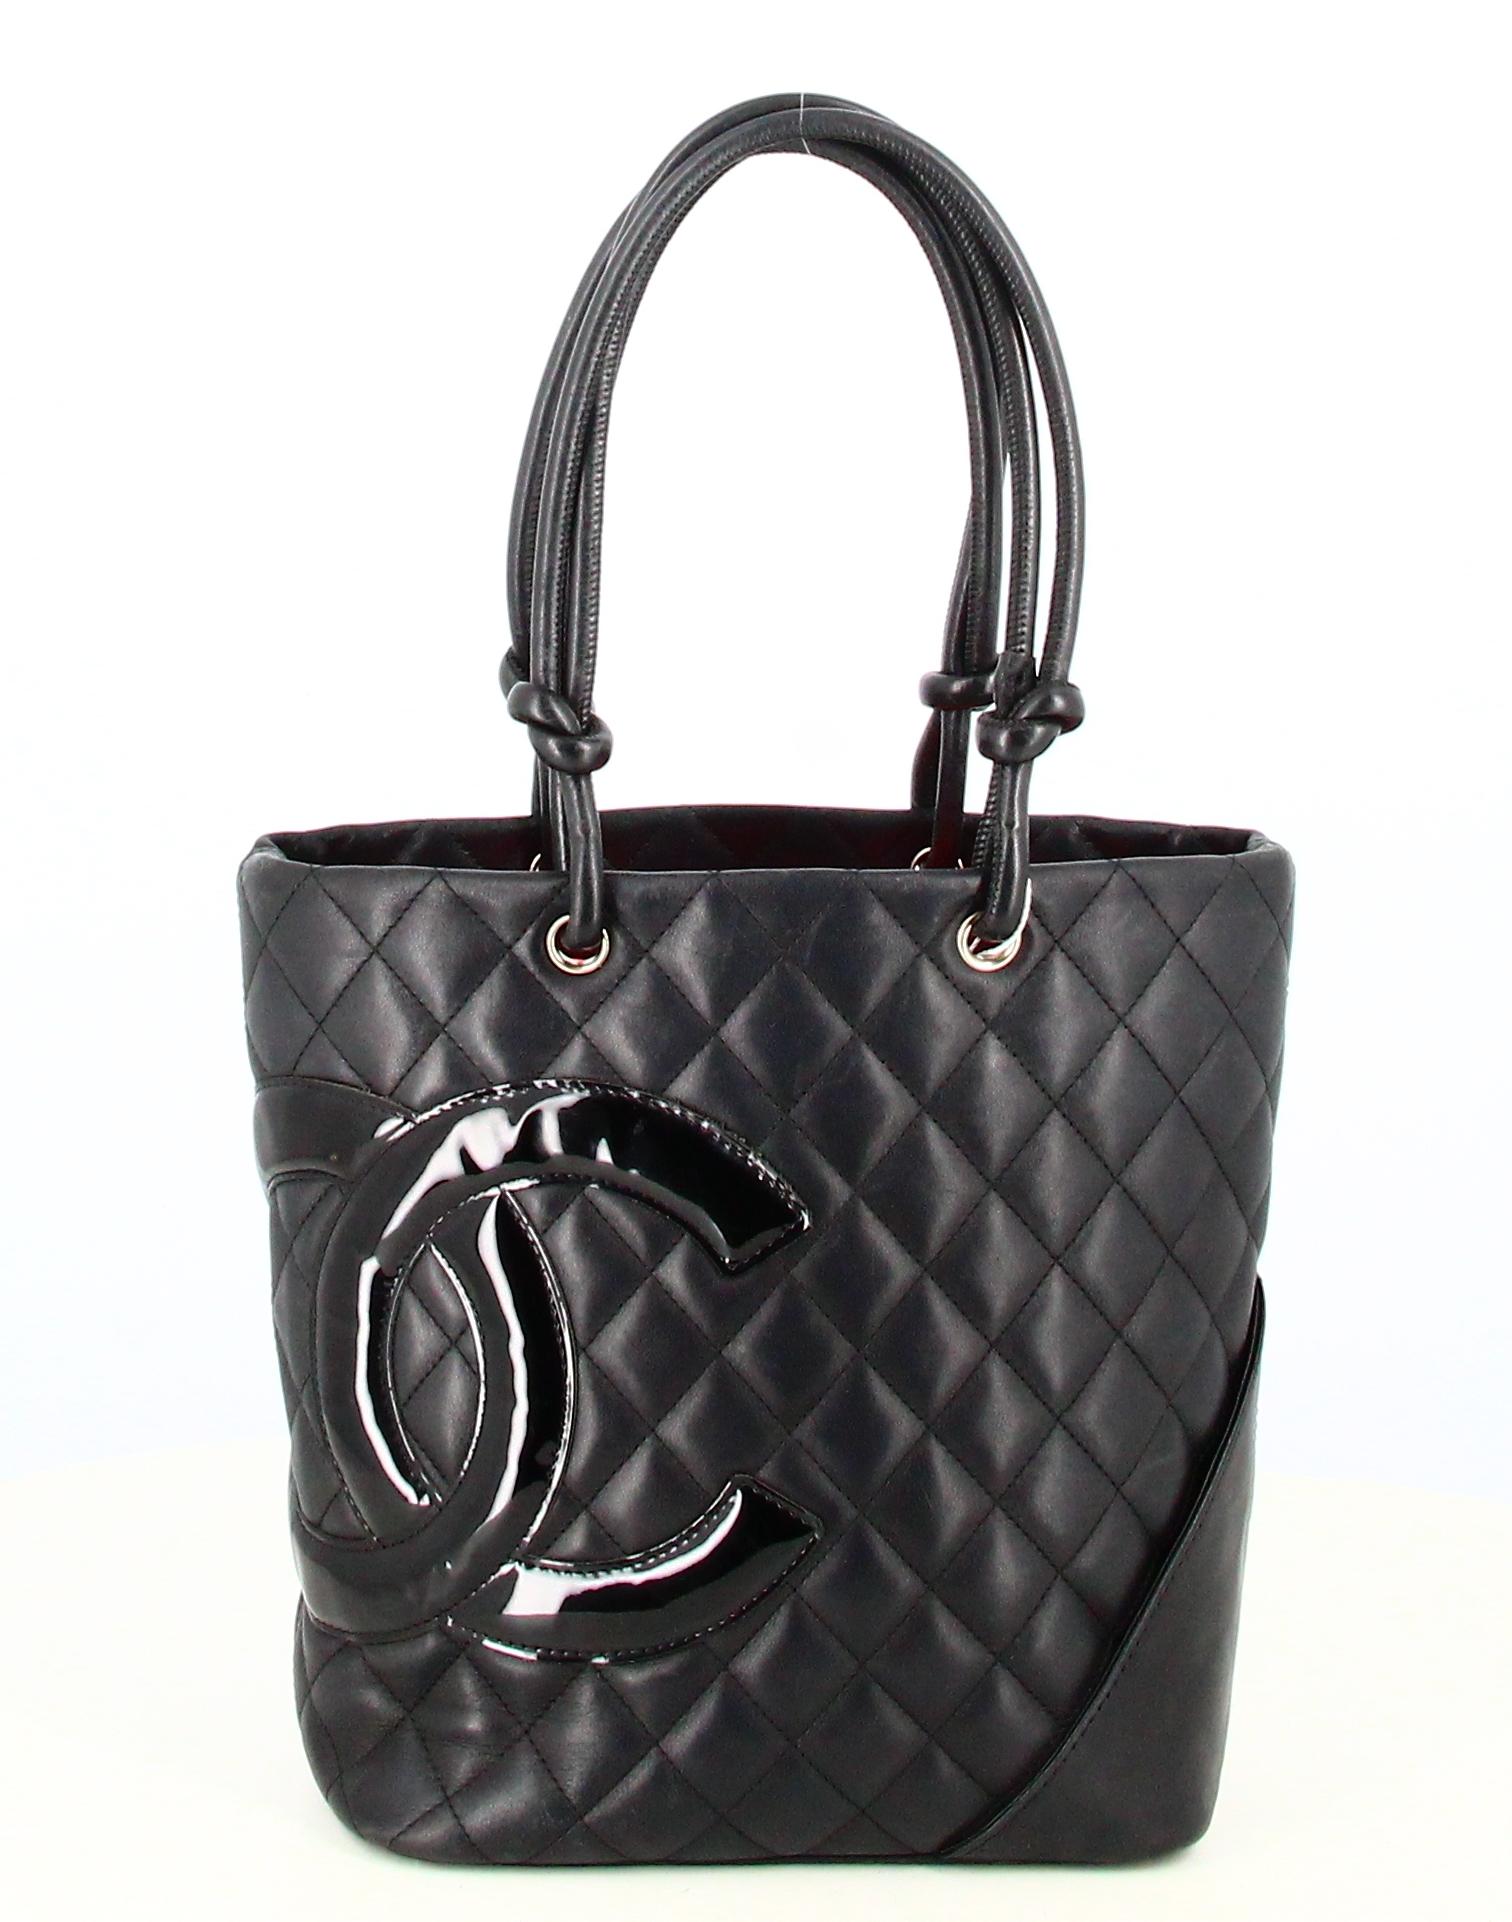 Chanel Cambon Handbag Black Quilted Leather

- Good condition. Slight traces of wear over time.
- Chanel Cambon Handbag
- Black quilted leather
- Chanel double C logo 
- Inside: pink double C logo lining 
- Two black leather straps 
